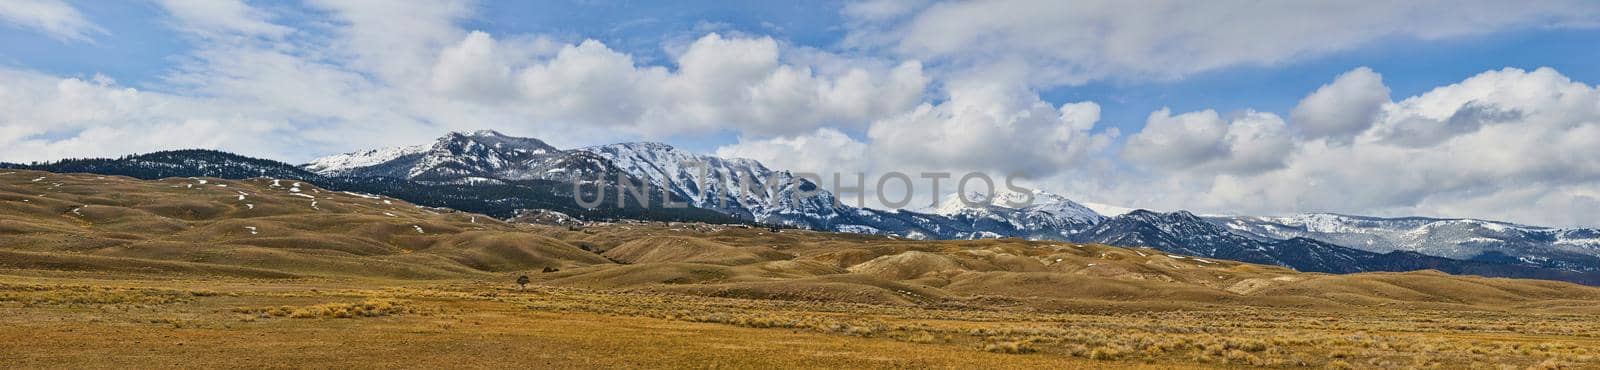 Panorama of fields in west lined with snowy mountains by njproductions